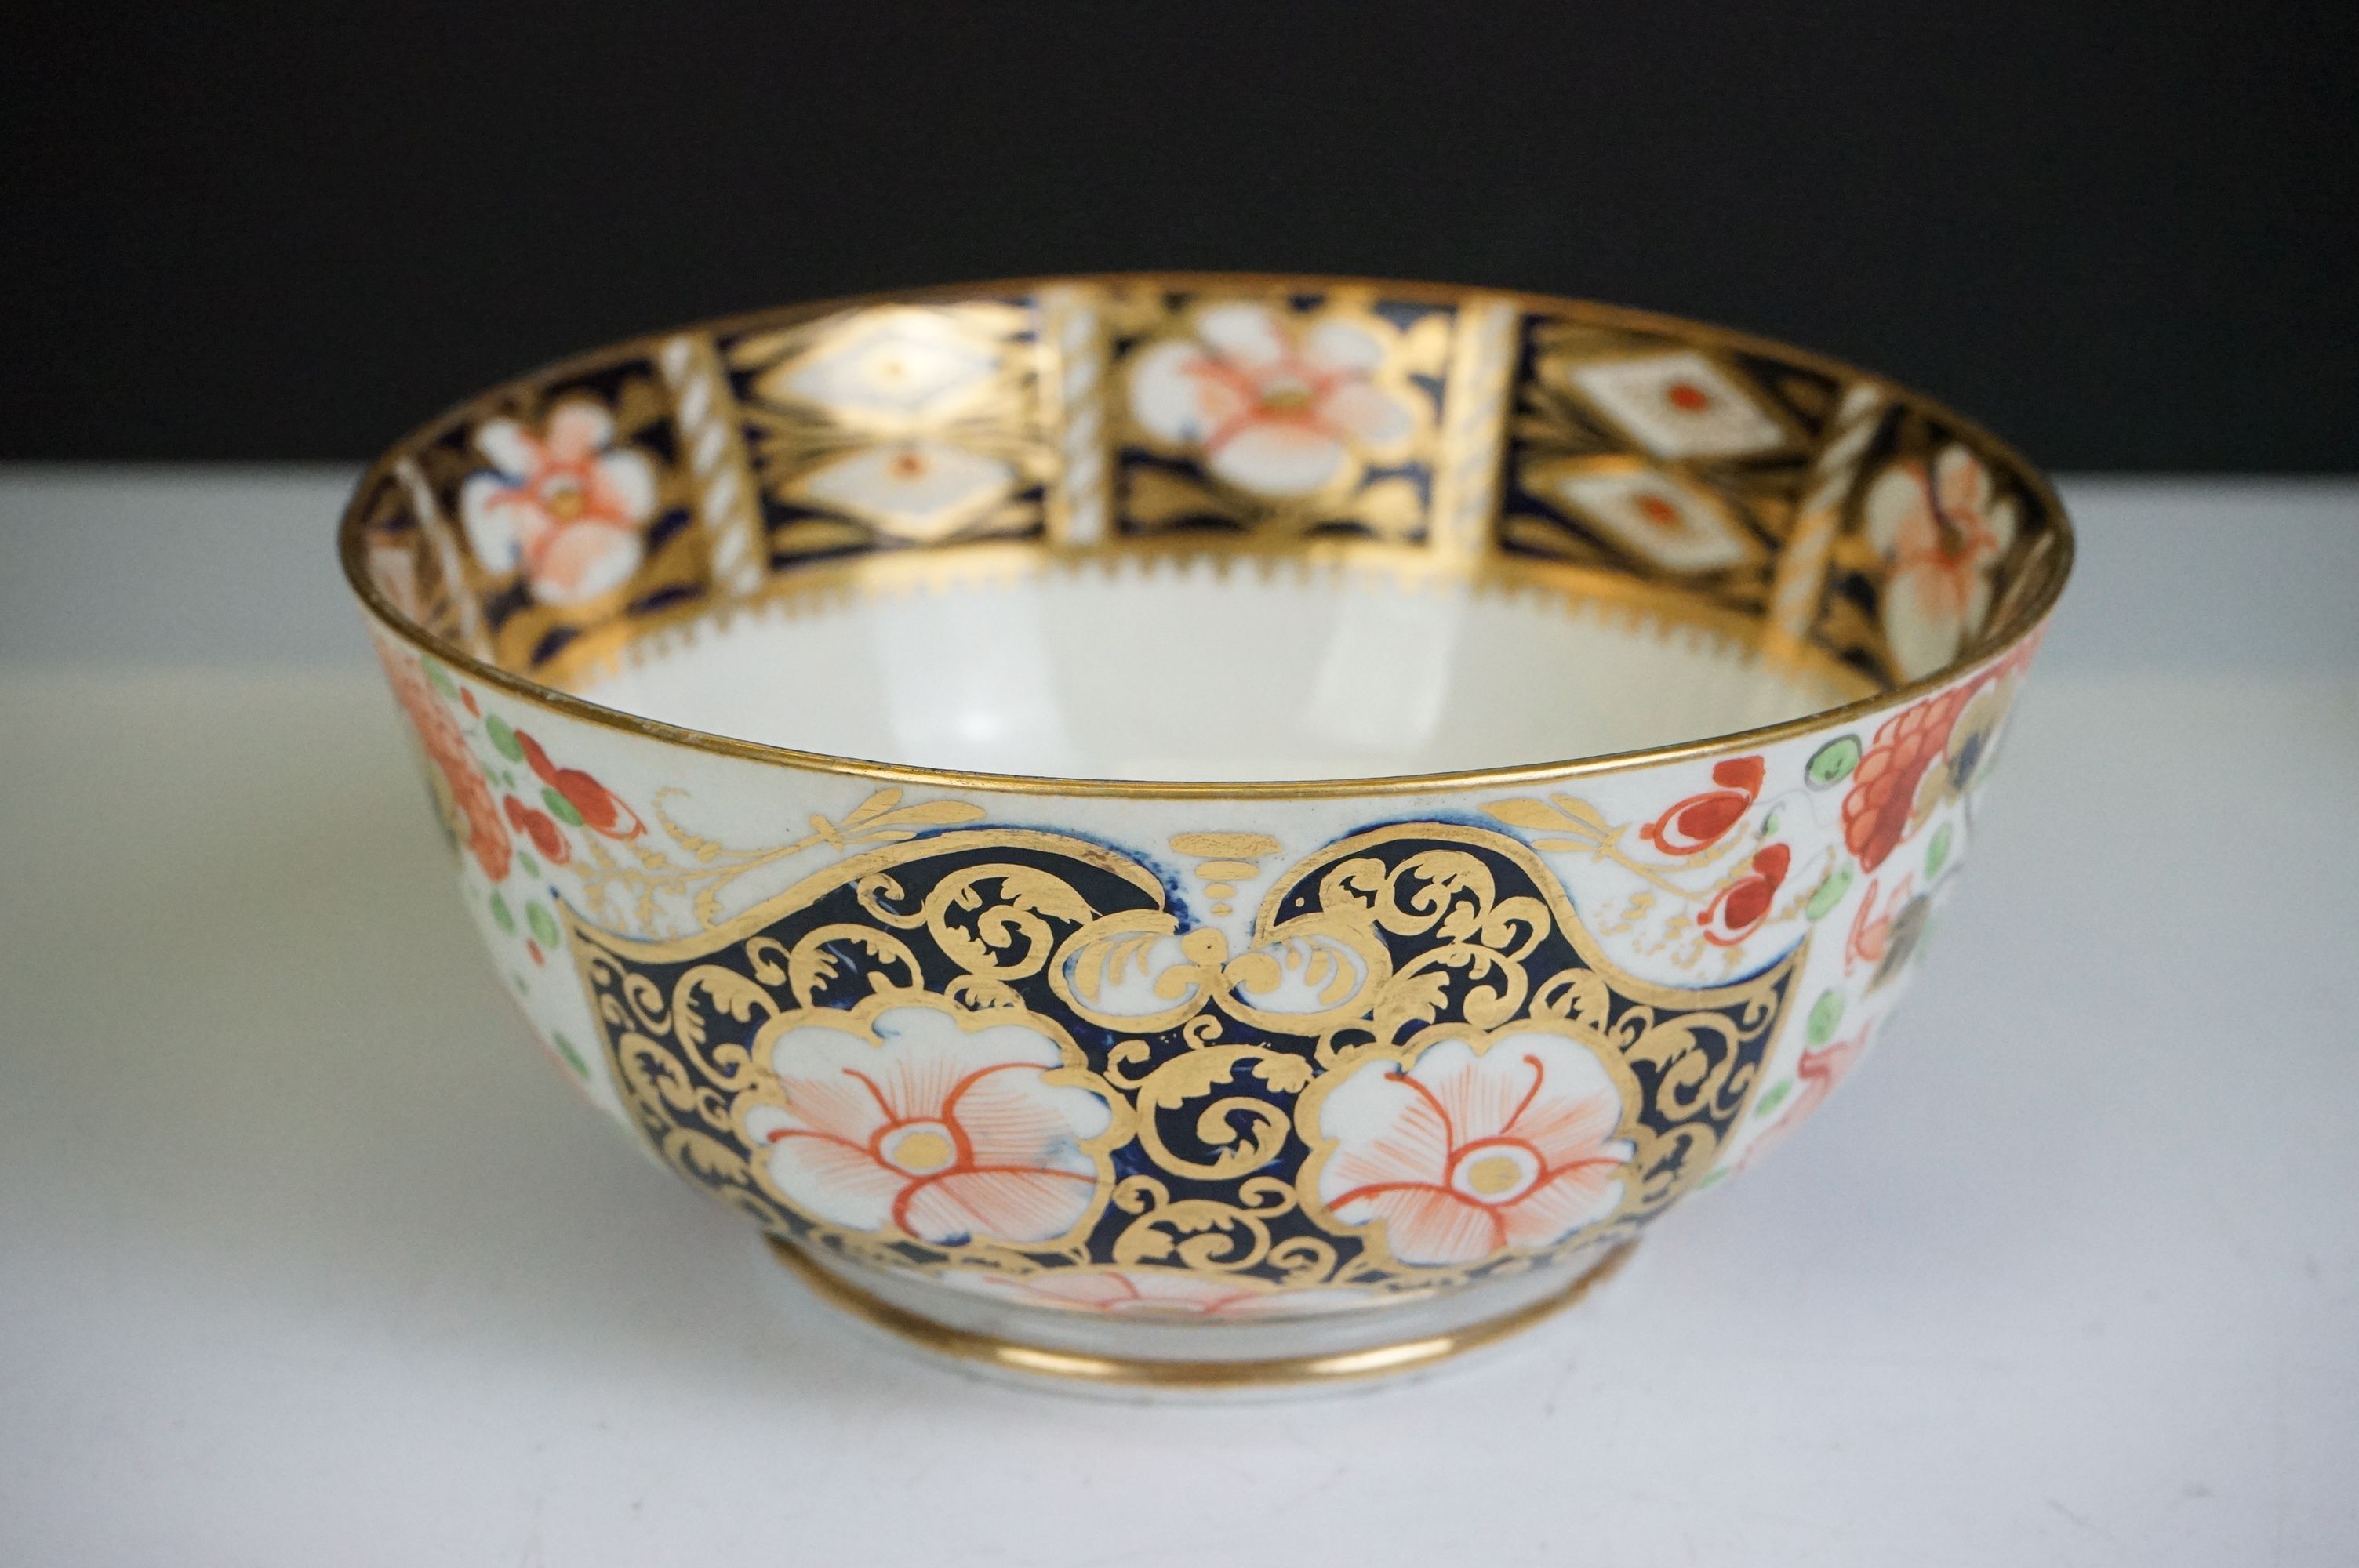 Early 19th century Crown Derby Imari pattern ceramics to include a small tureen & cover, teacups, - Image 10 of 24